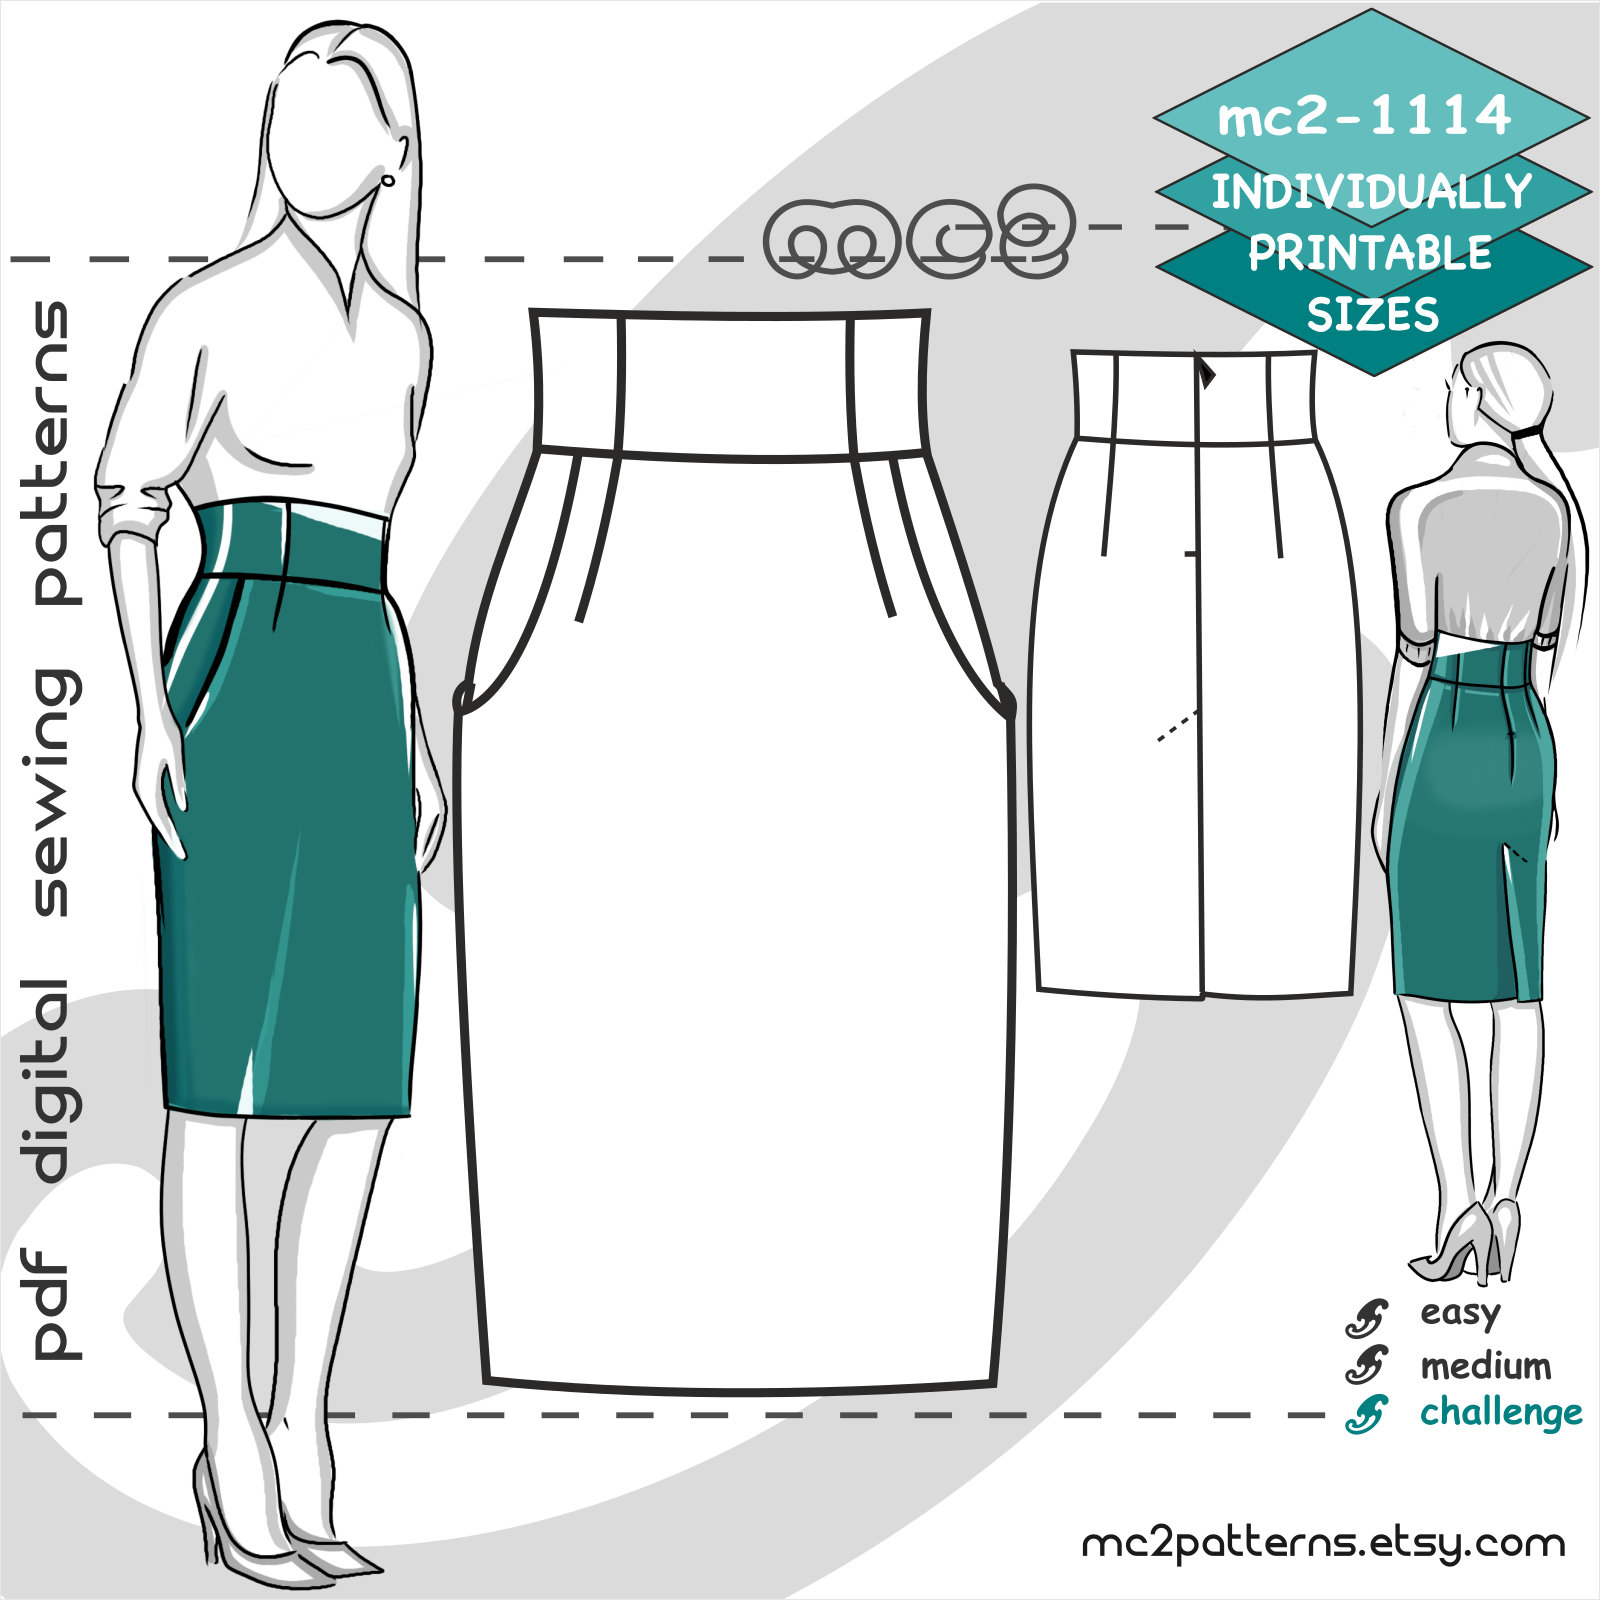 Skirt sewing patterns for women PDF: high waisted, circle, pencil